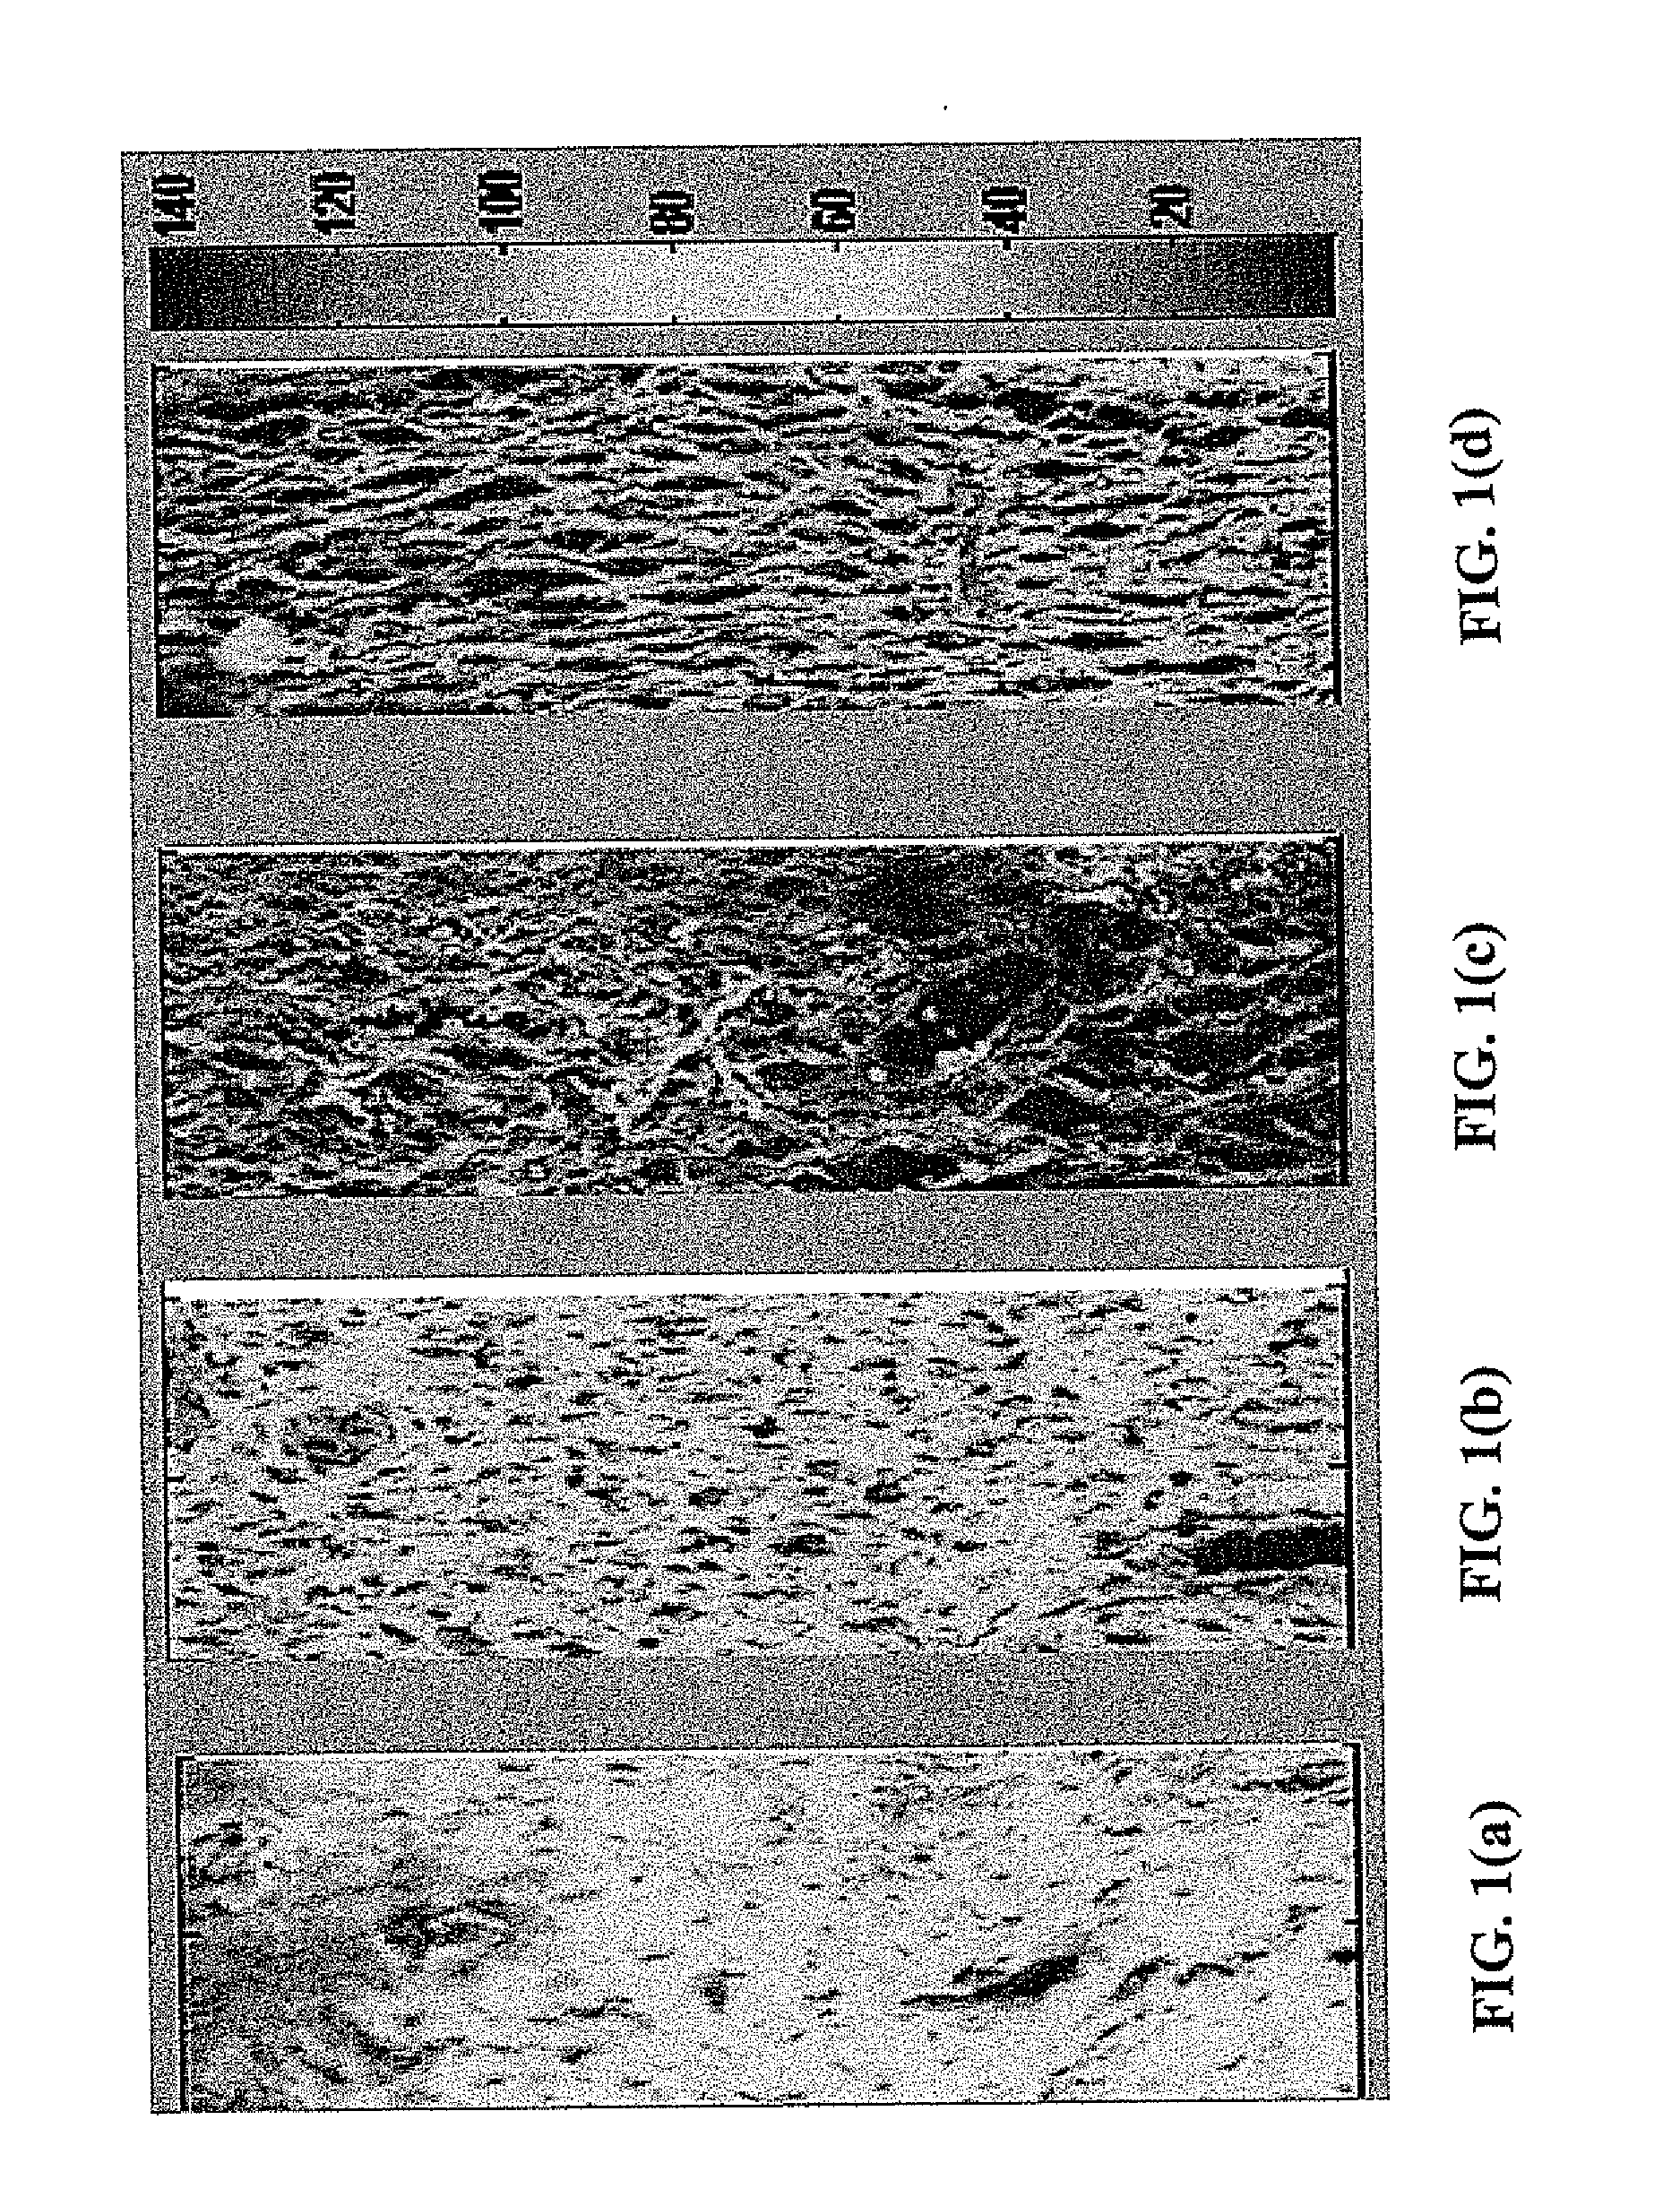 Spatial frequency spectrometer for and method of detection of spatial structures in materials